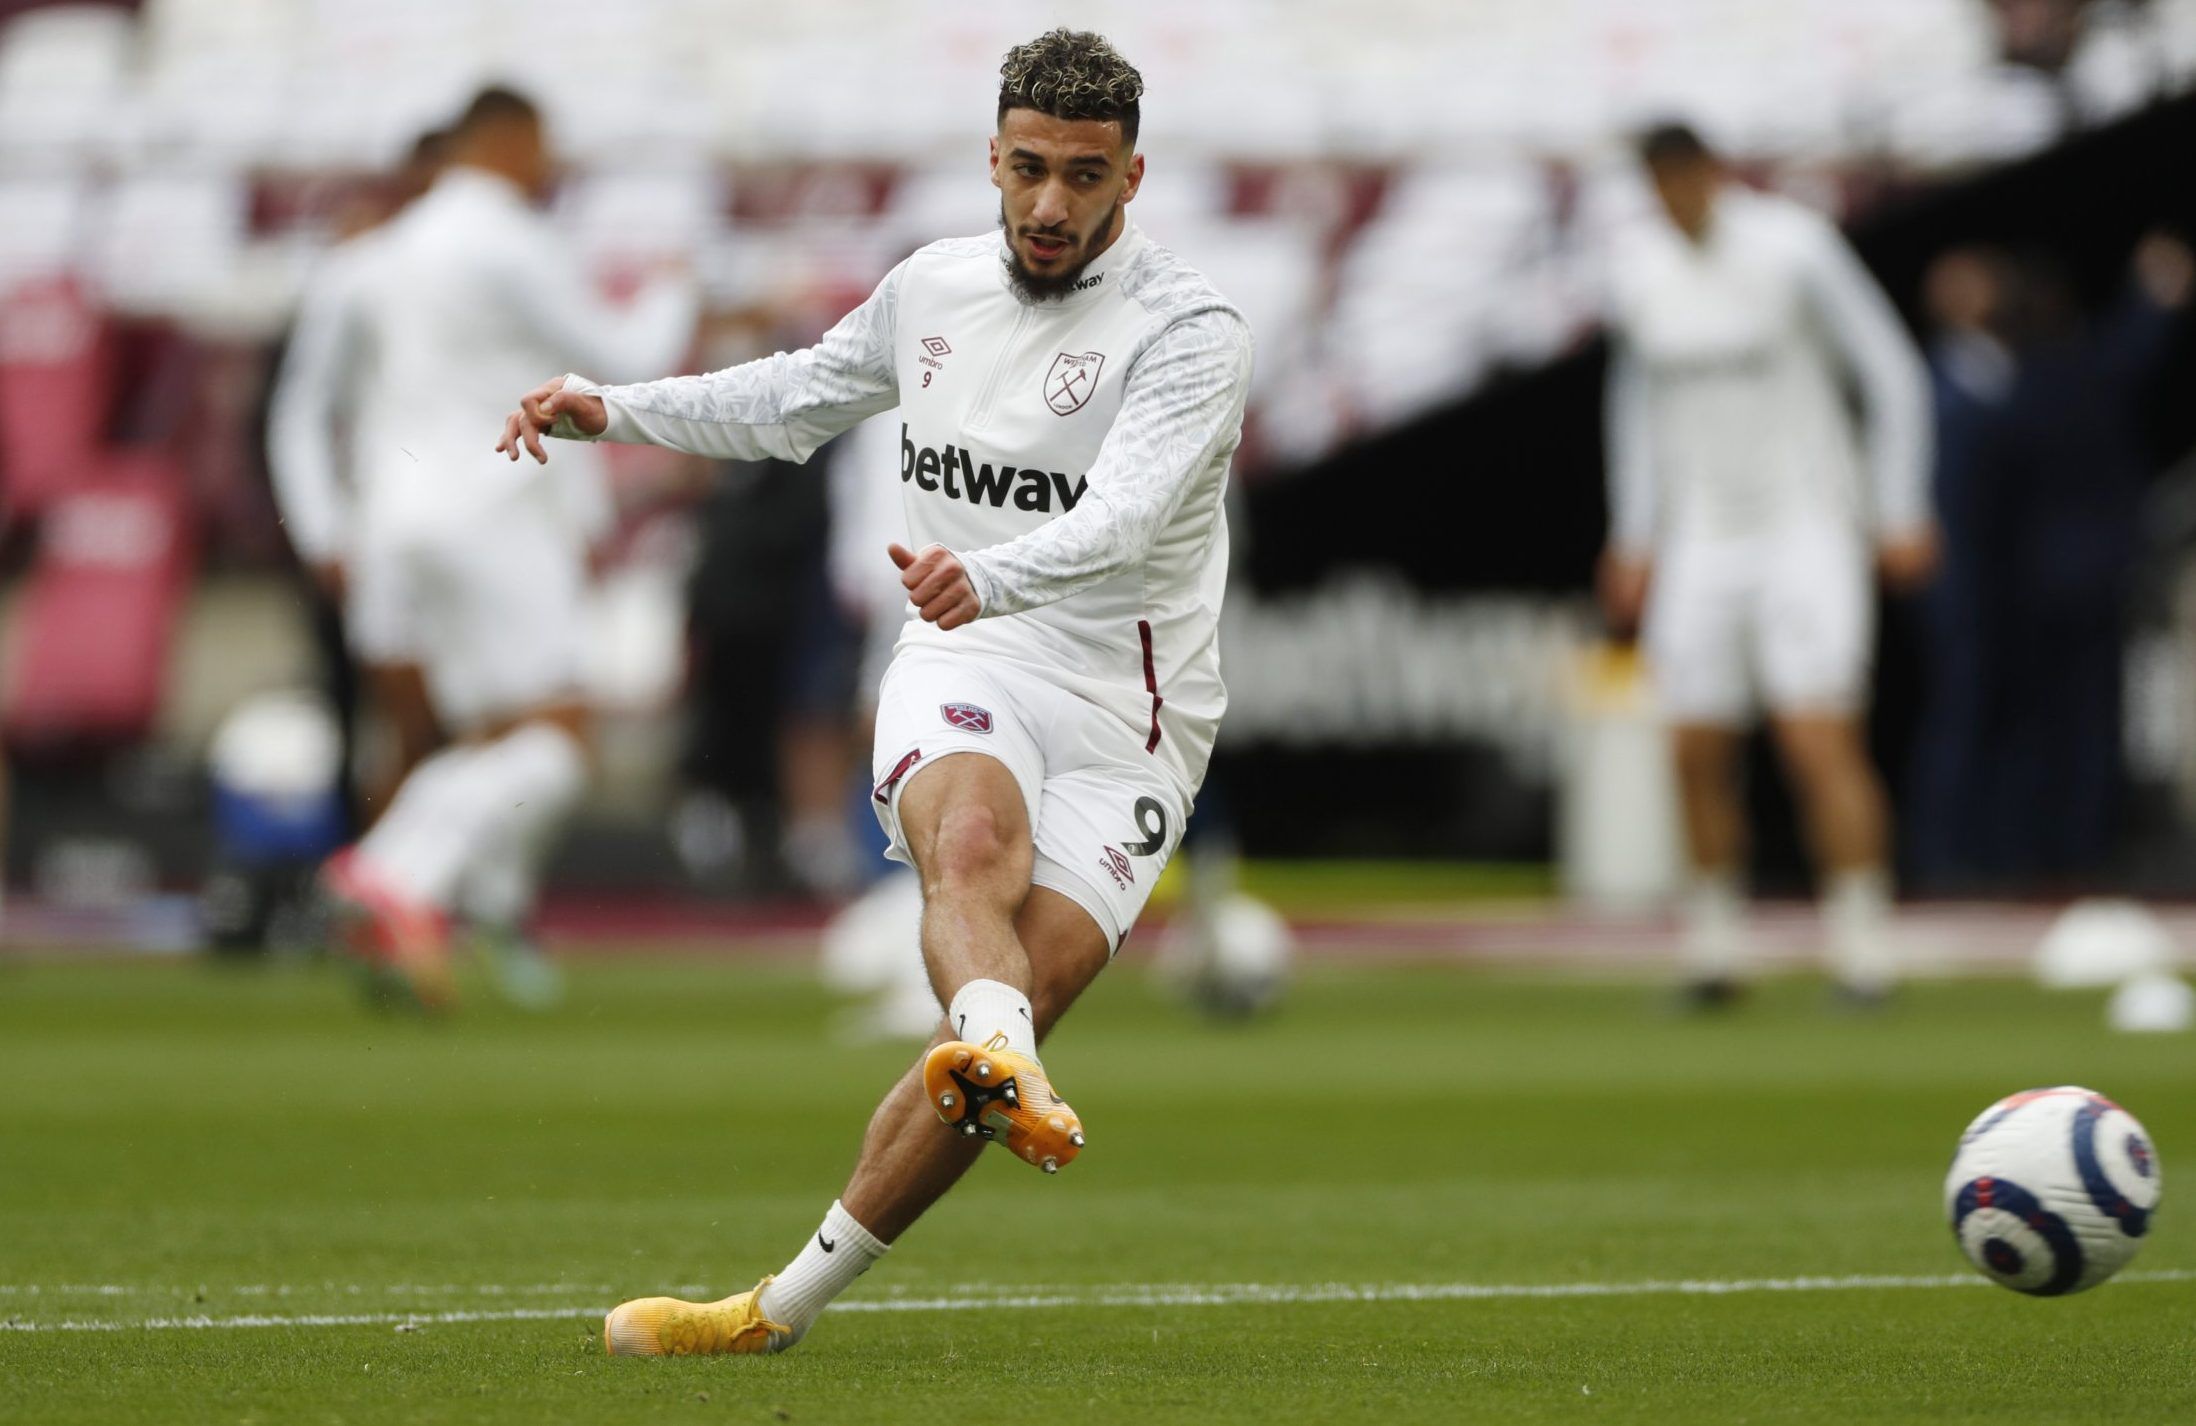 west ham winger said benrahma during warm up against arsenal in the premier league